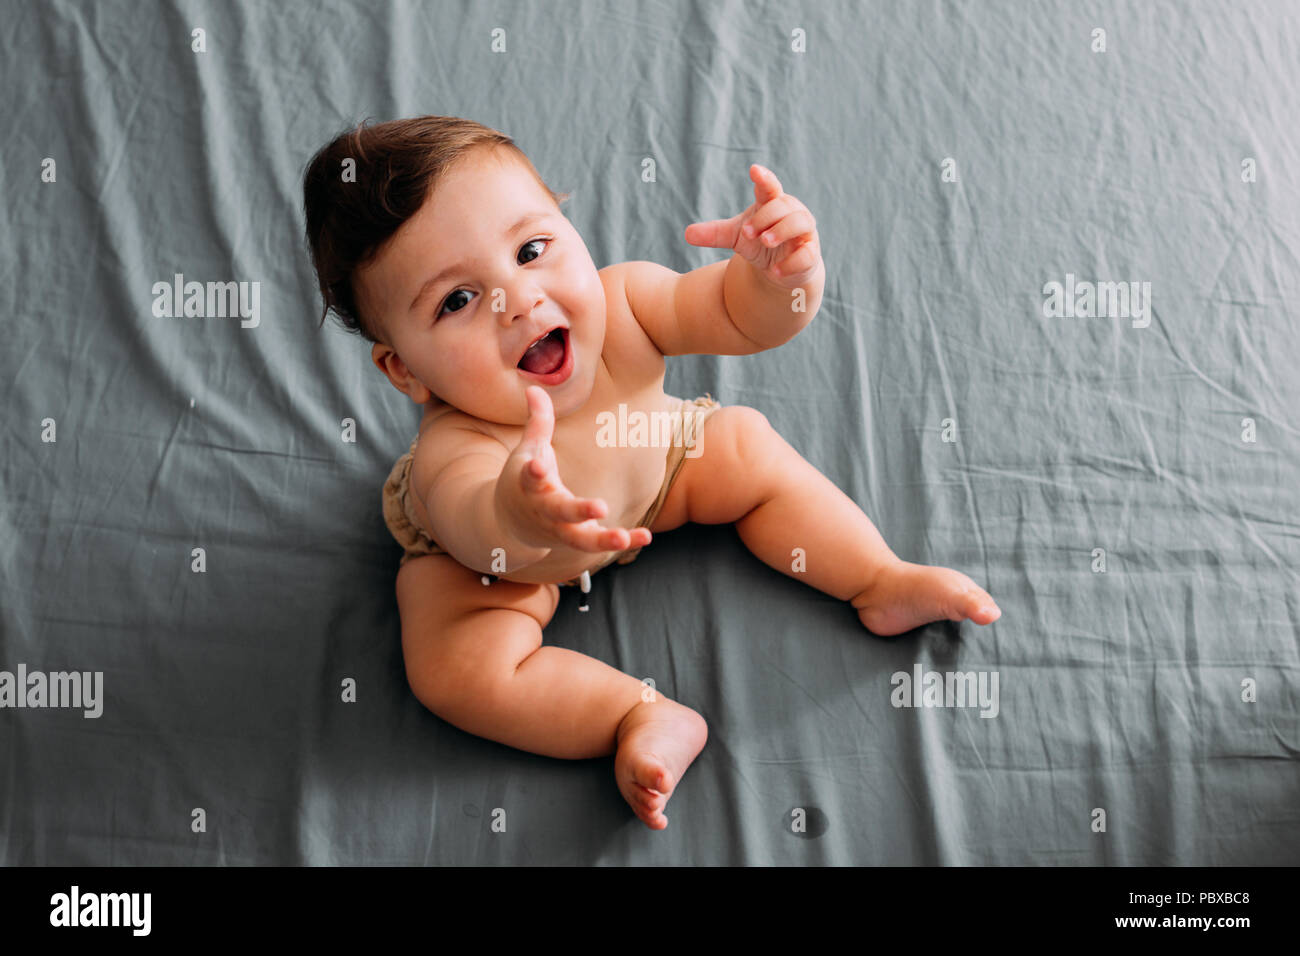 Top view of smiling baby sitting on the bed in the room wearing shorts Stock Photo